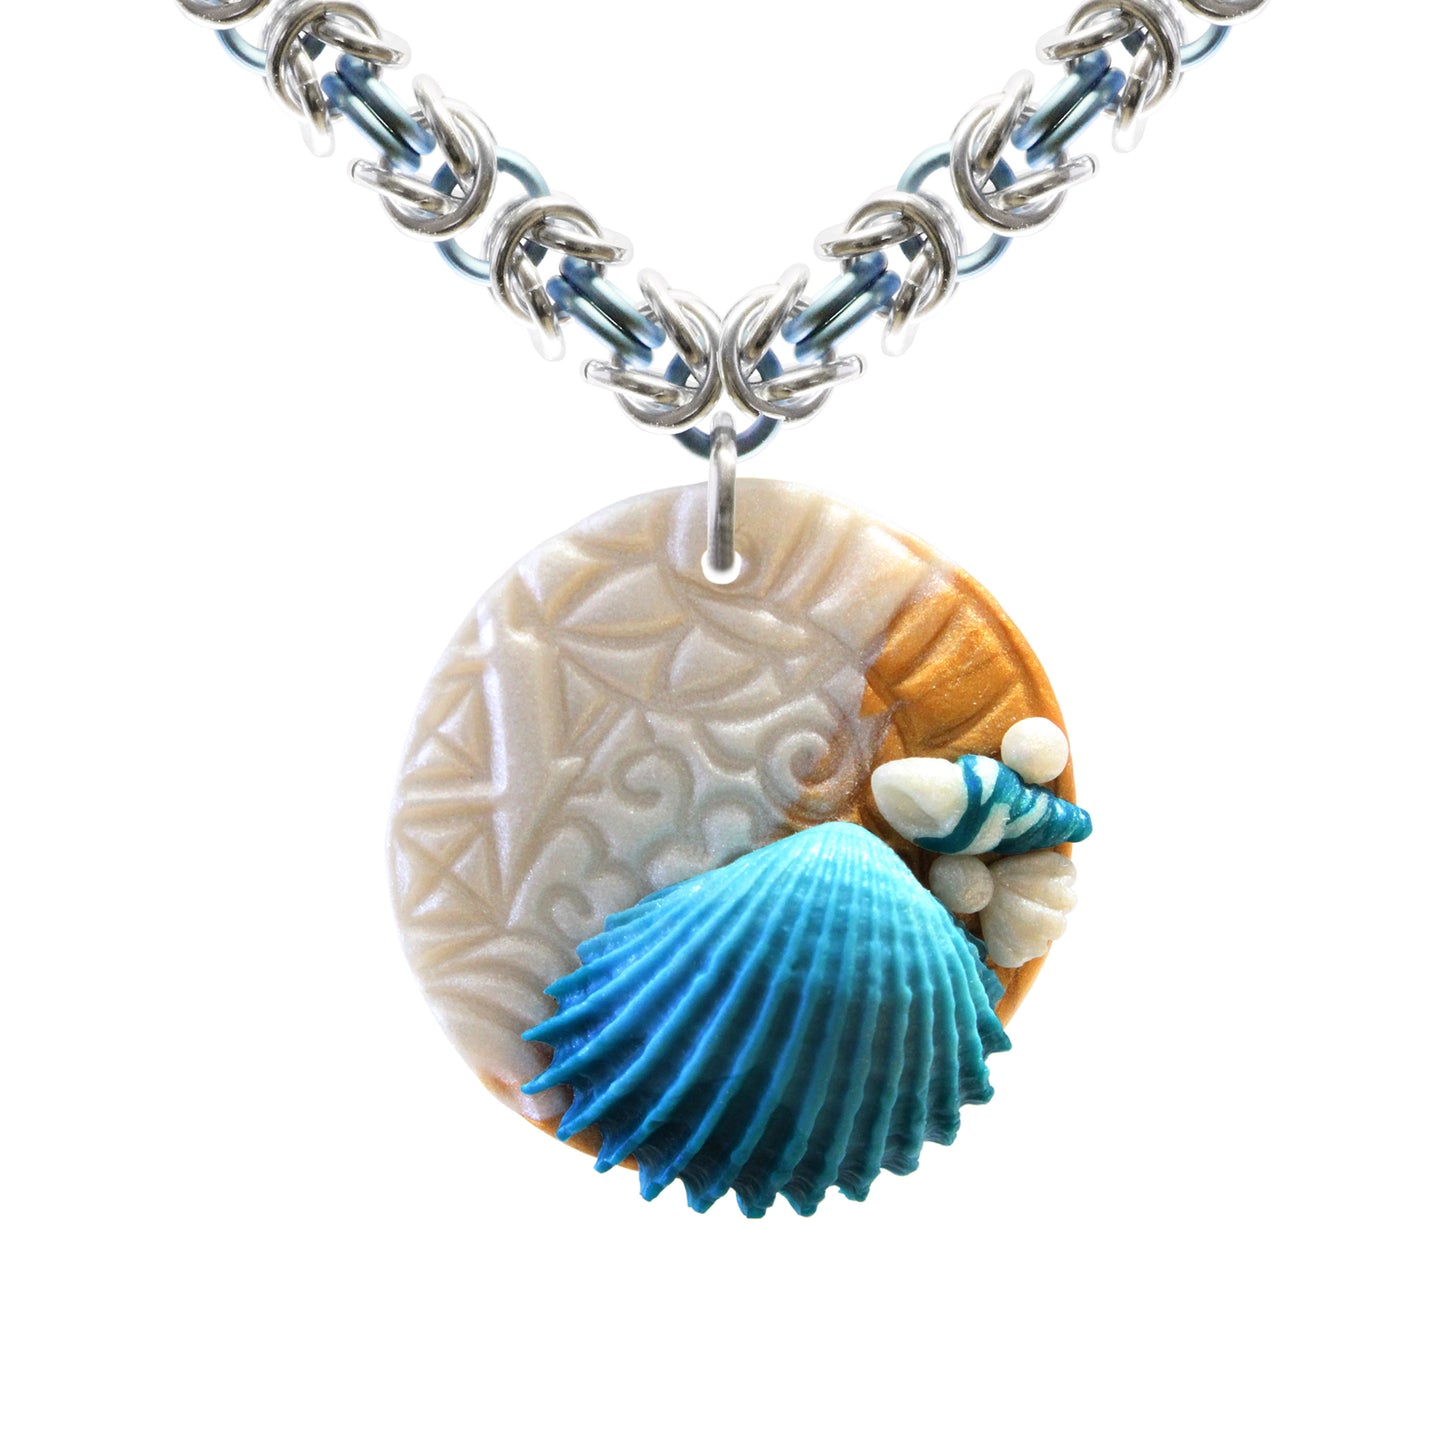 Beach Chainmail Necklace with shell pendant / 23 Inch length / leather cord and chainmail